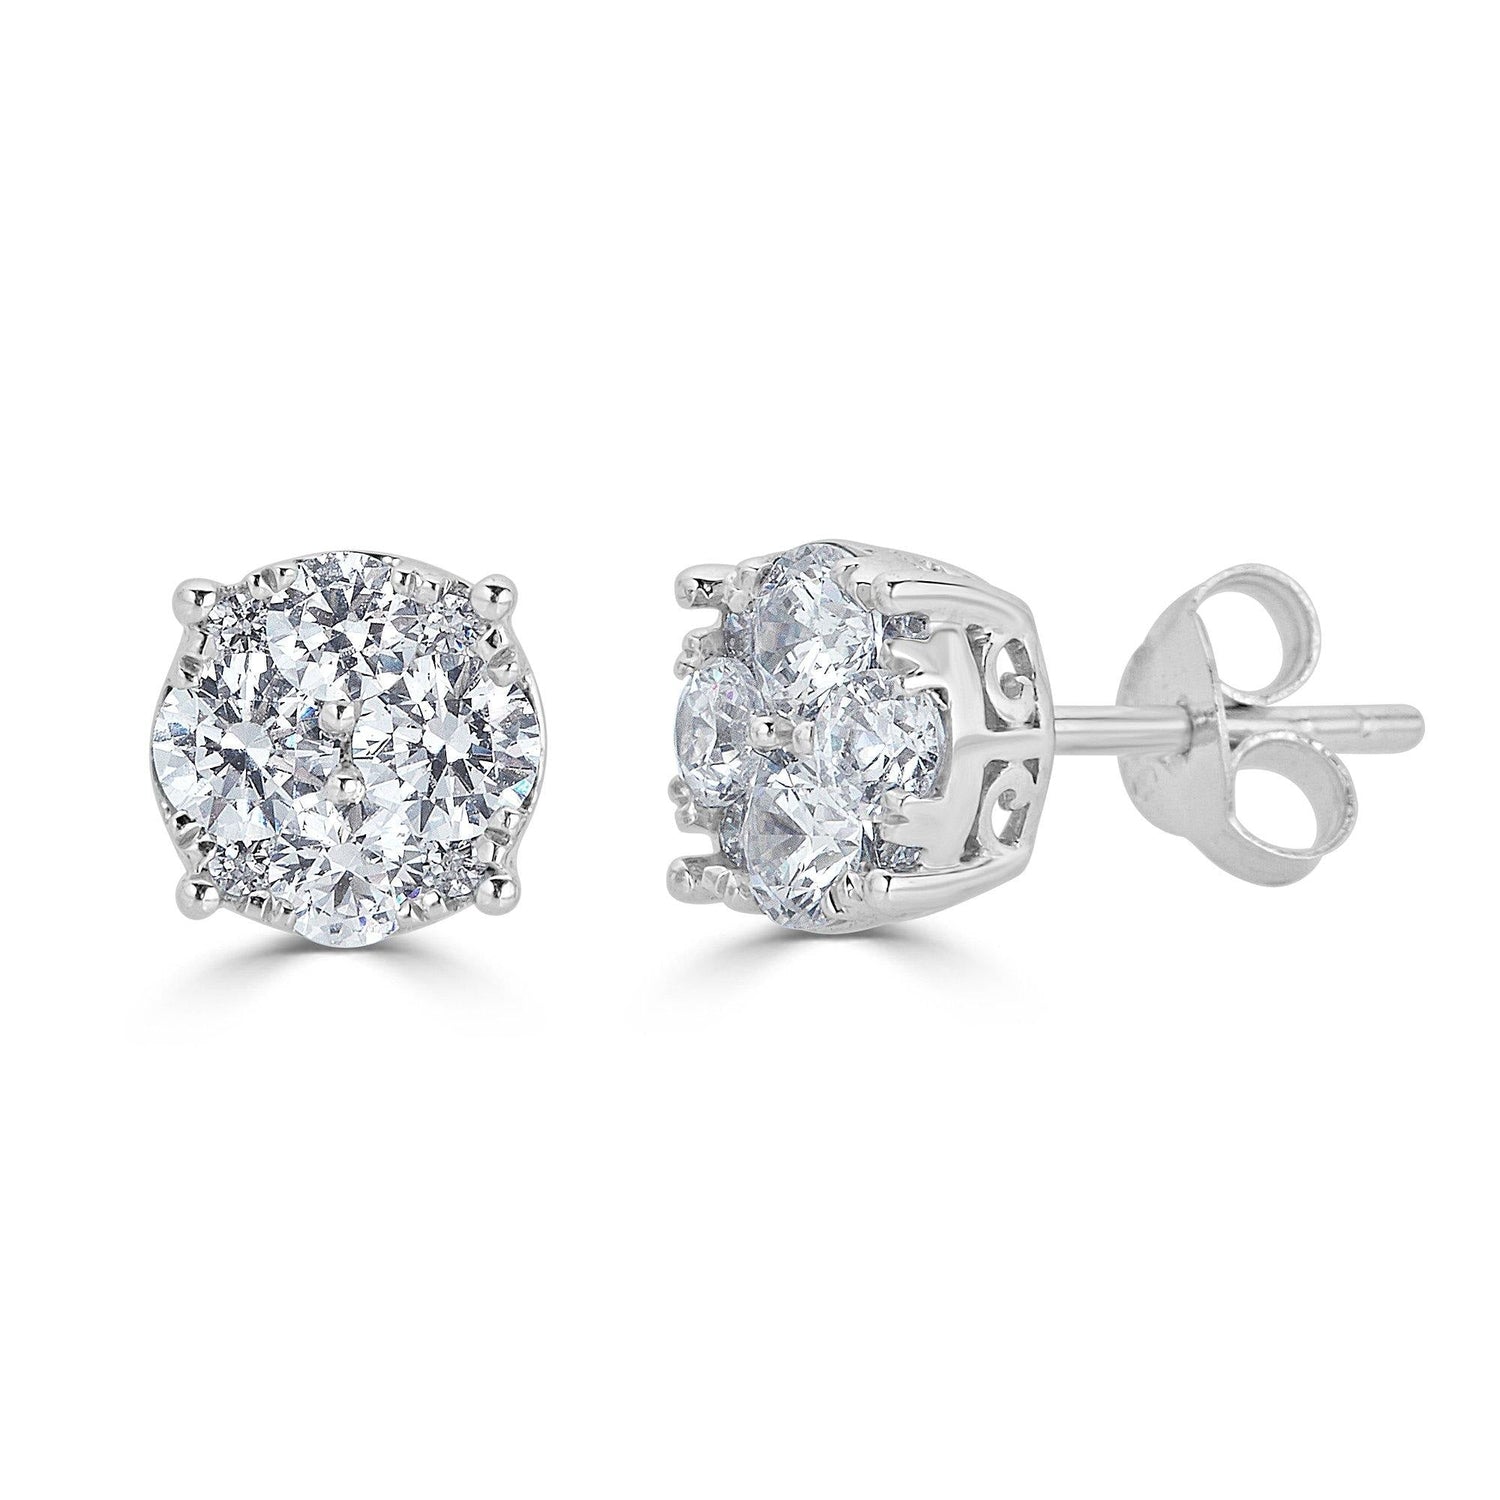 2 Ct. T.W. Mined White Diamond 14K Gold 6.3mm Stud Earrings | One Size | Earrings Stud Earrings | in A Gift Box | Christmas Gifts